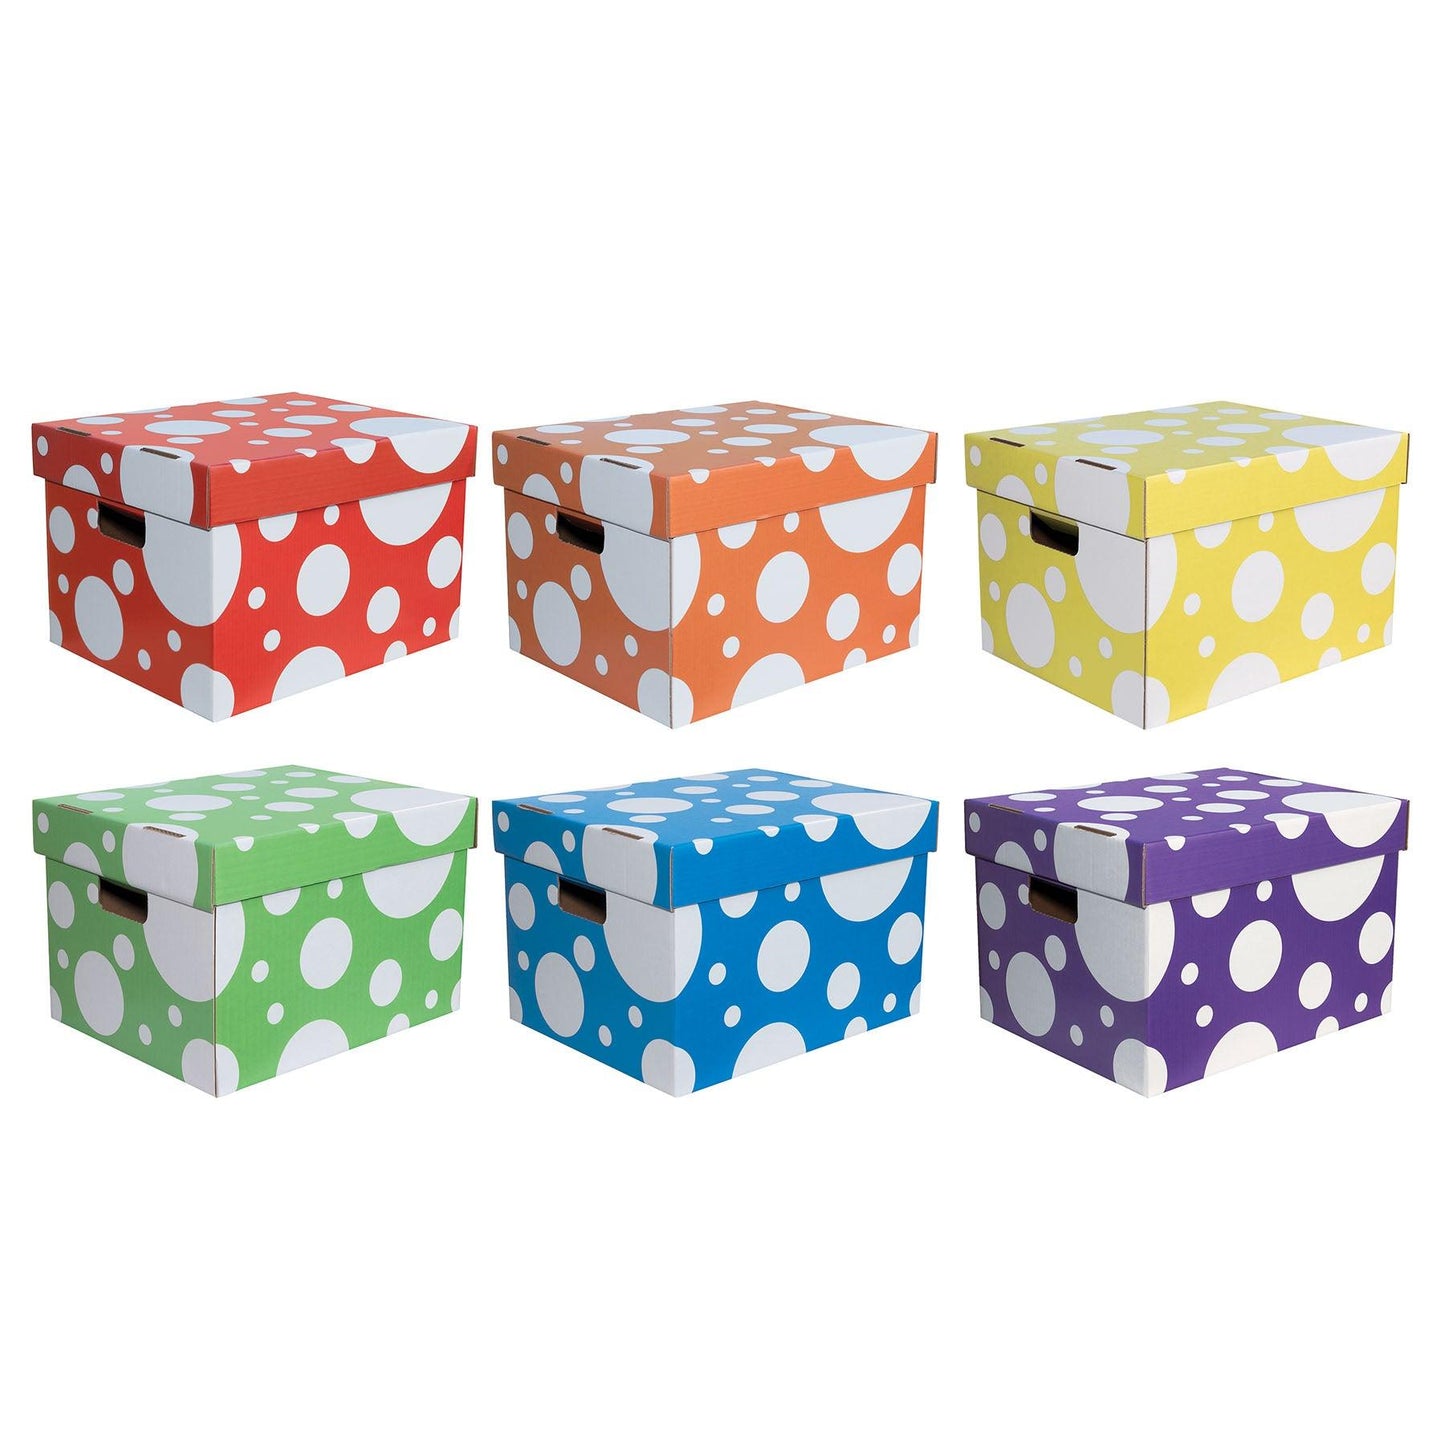 Storage Totes, 6 Assorted Polka Dot Colors, 10-1/8"H x 12-1/4"W x 15-1/4"D, Pack of 6 - Loomini